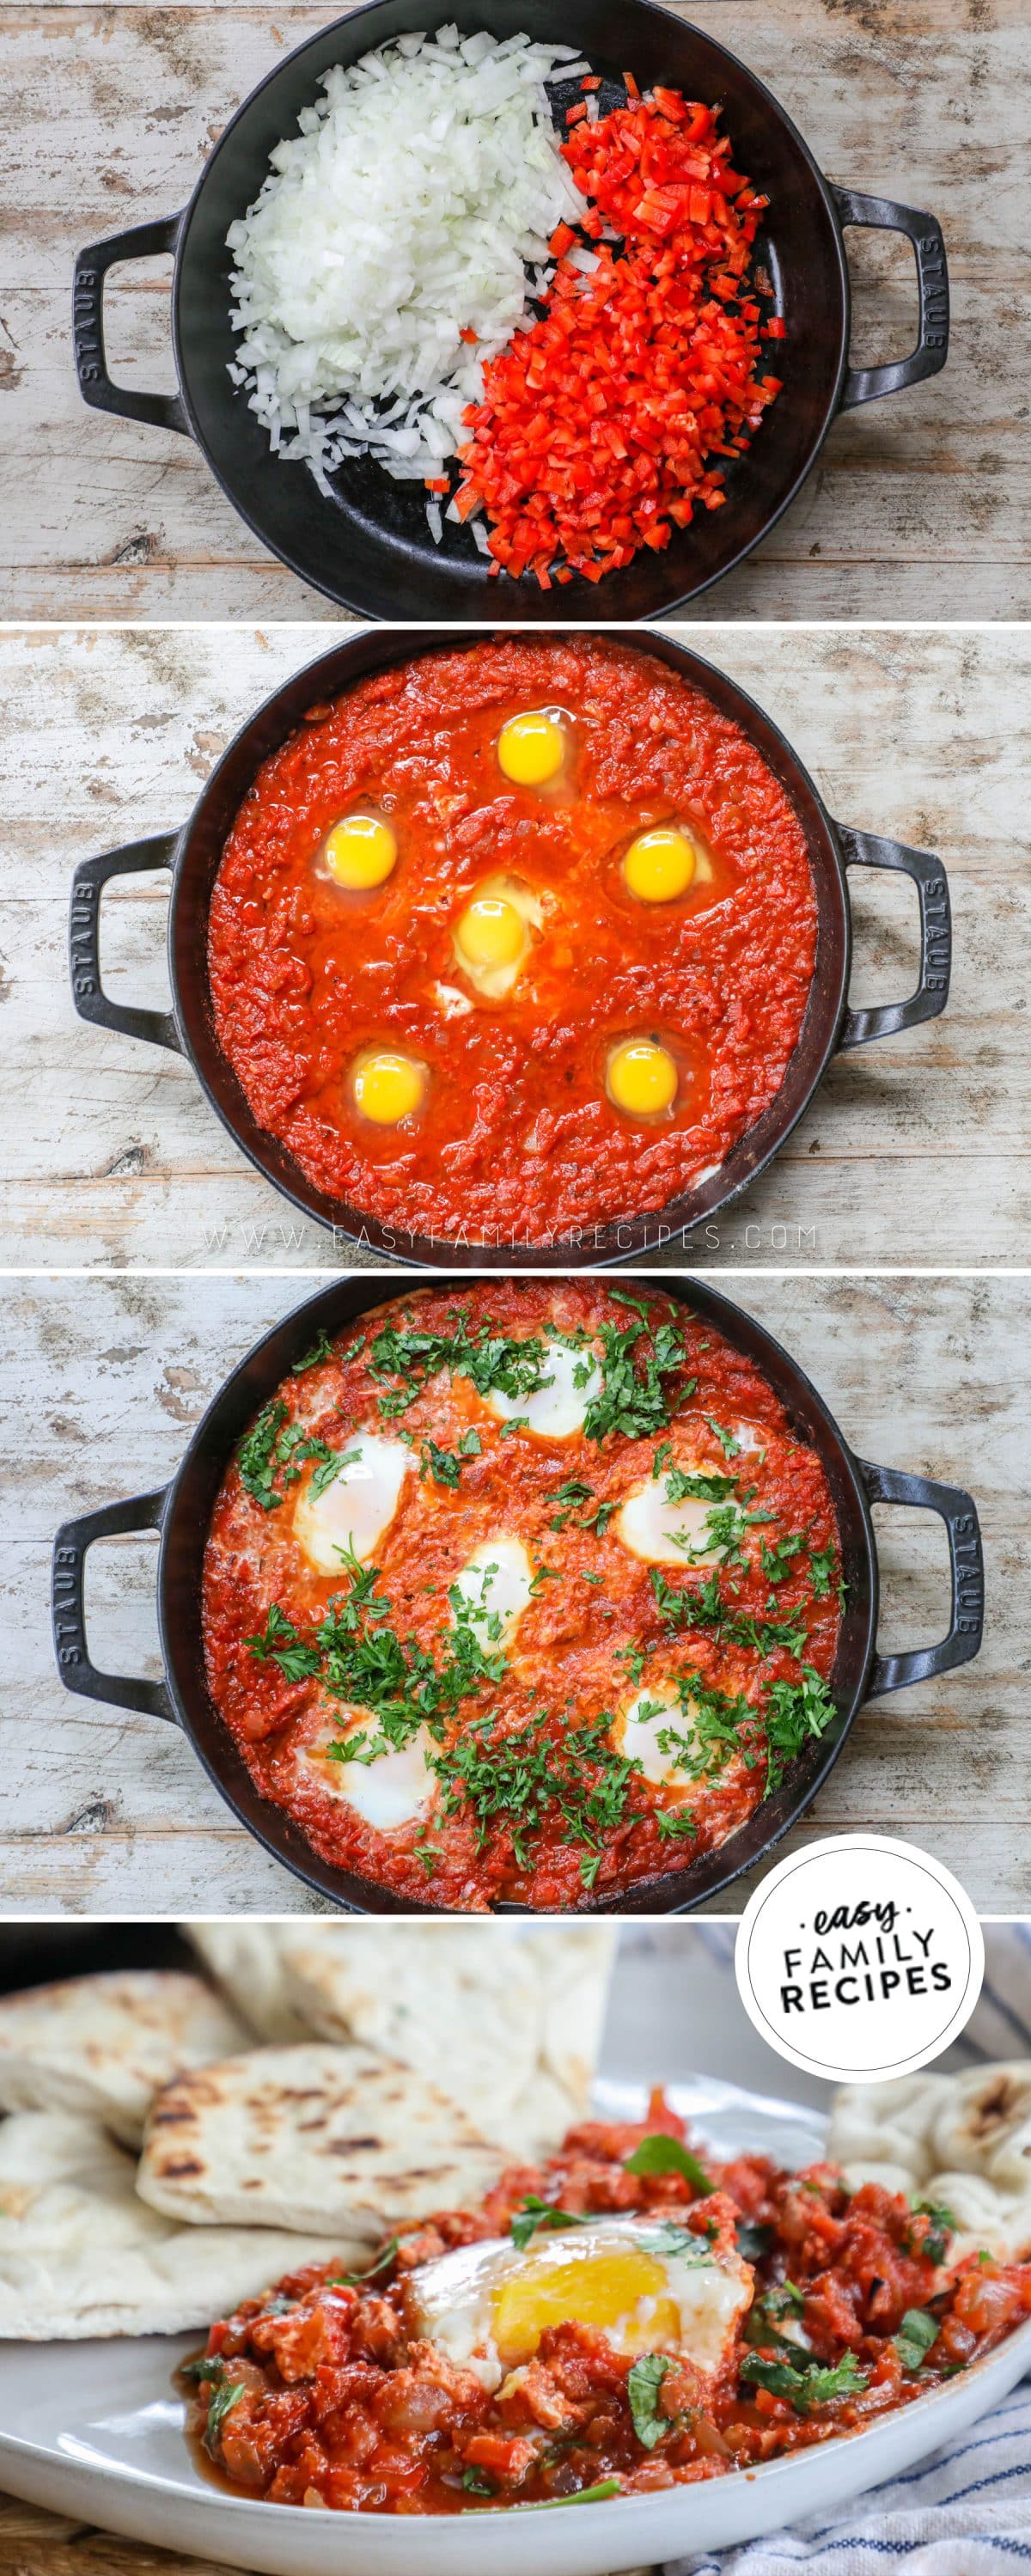 Process photos for making easy shakshuka with eggs. 1. Saute bell pepper and onion. Add tomatoes and spices. 3. edd eggs on top and cook to preferred doneness. Garnish with cilantro and parsley.